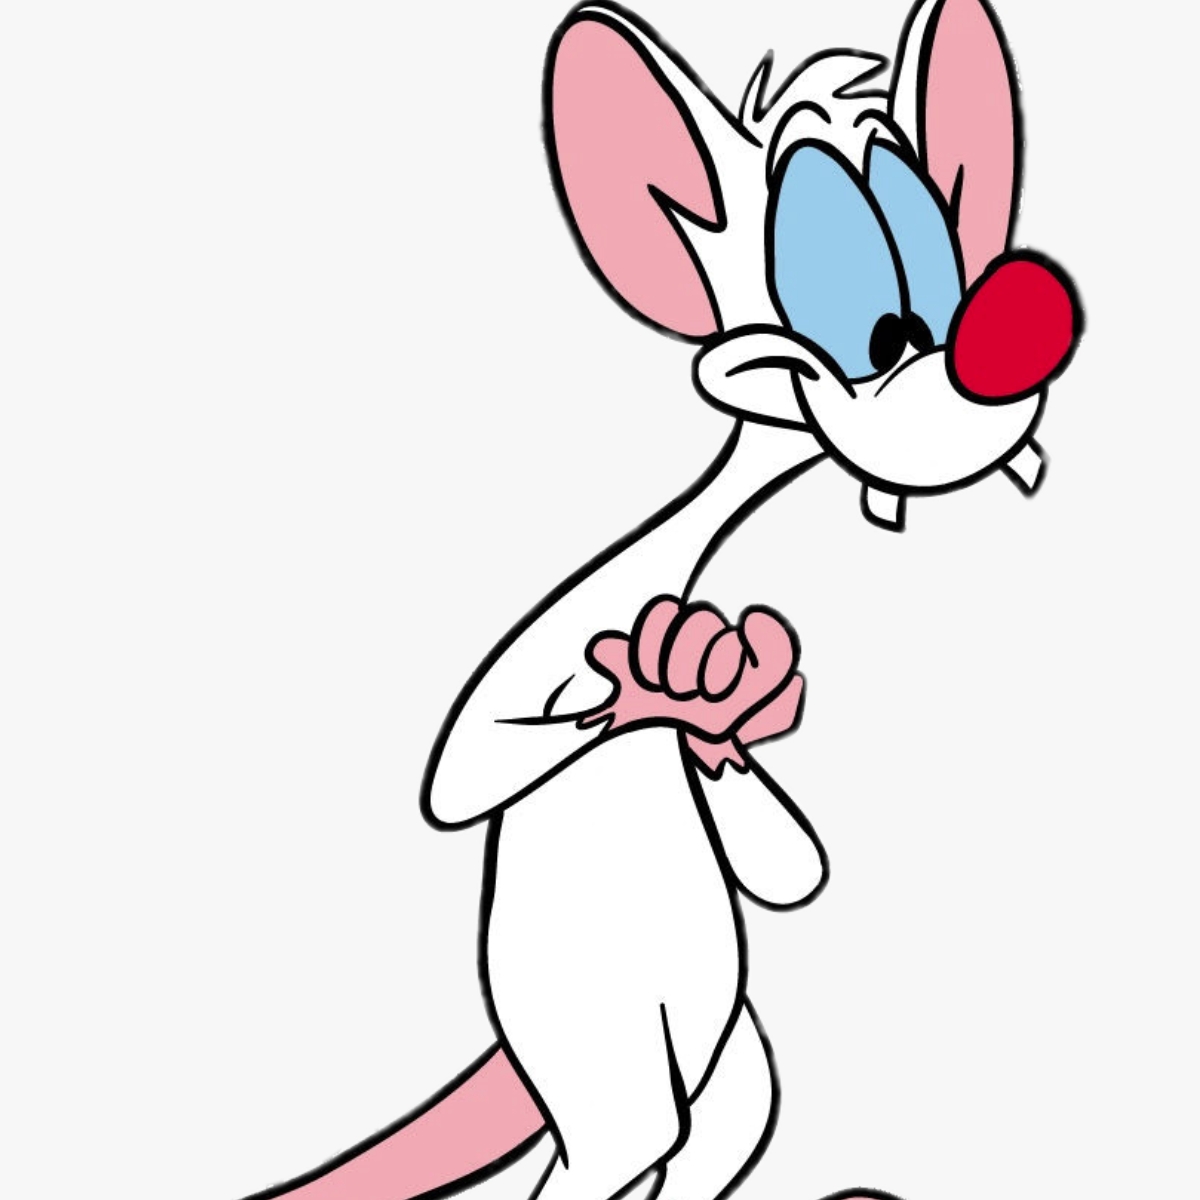 14 Facts About Pinky (Pinky And The Brain) 